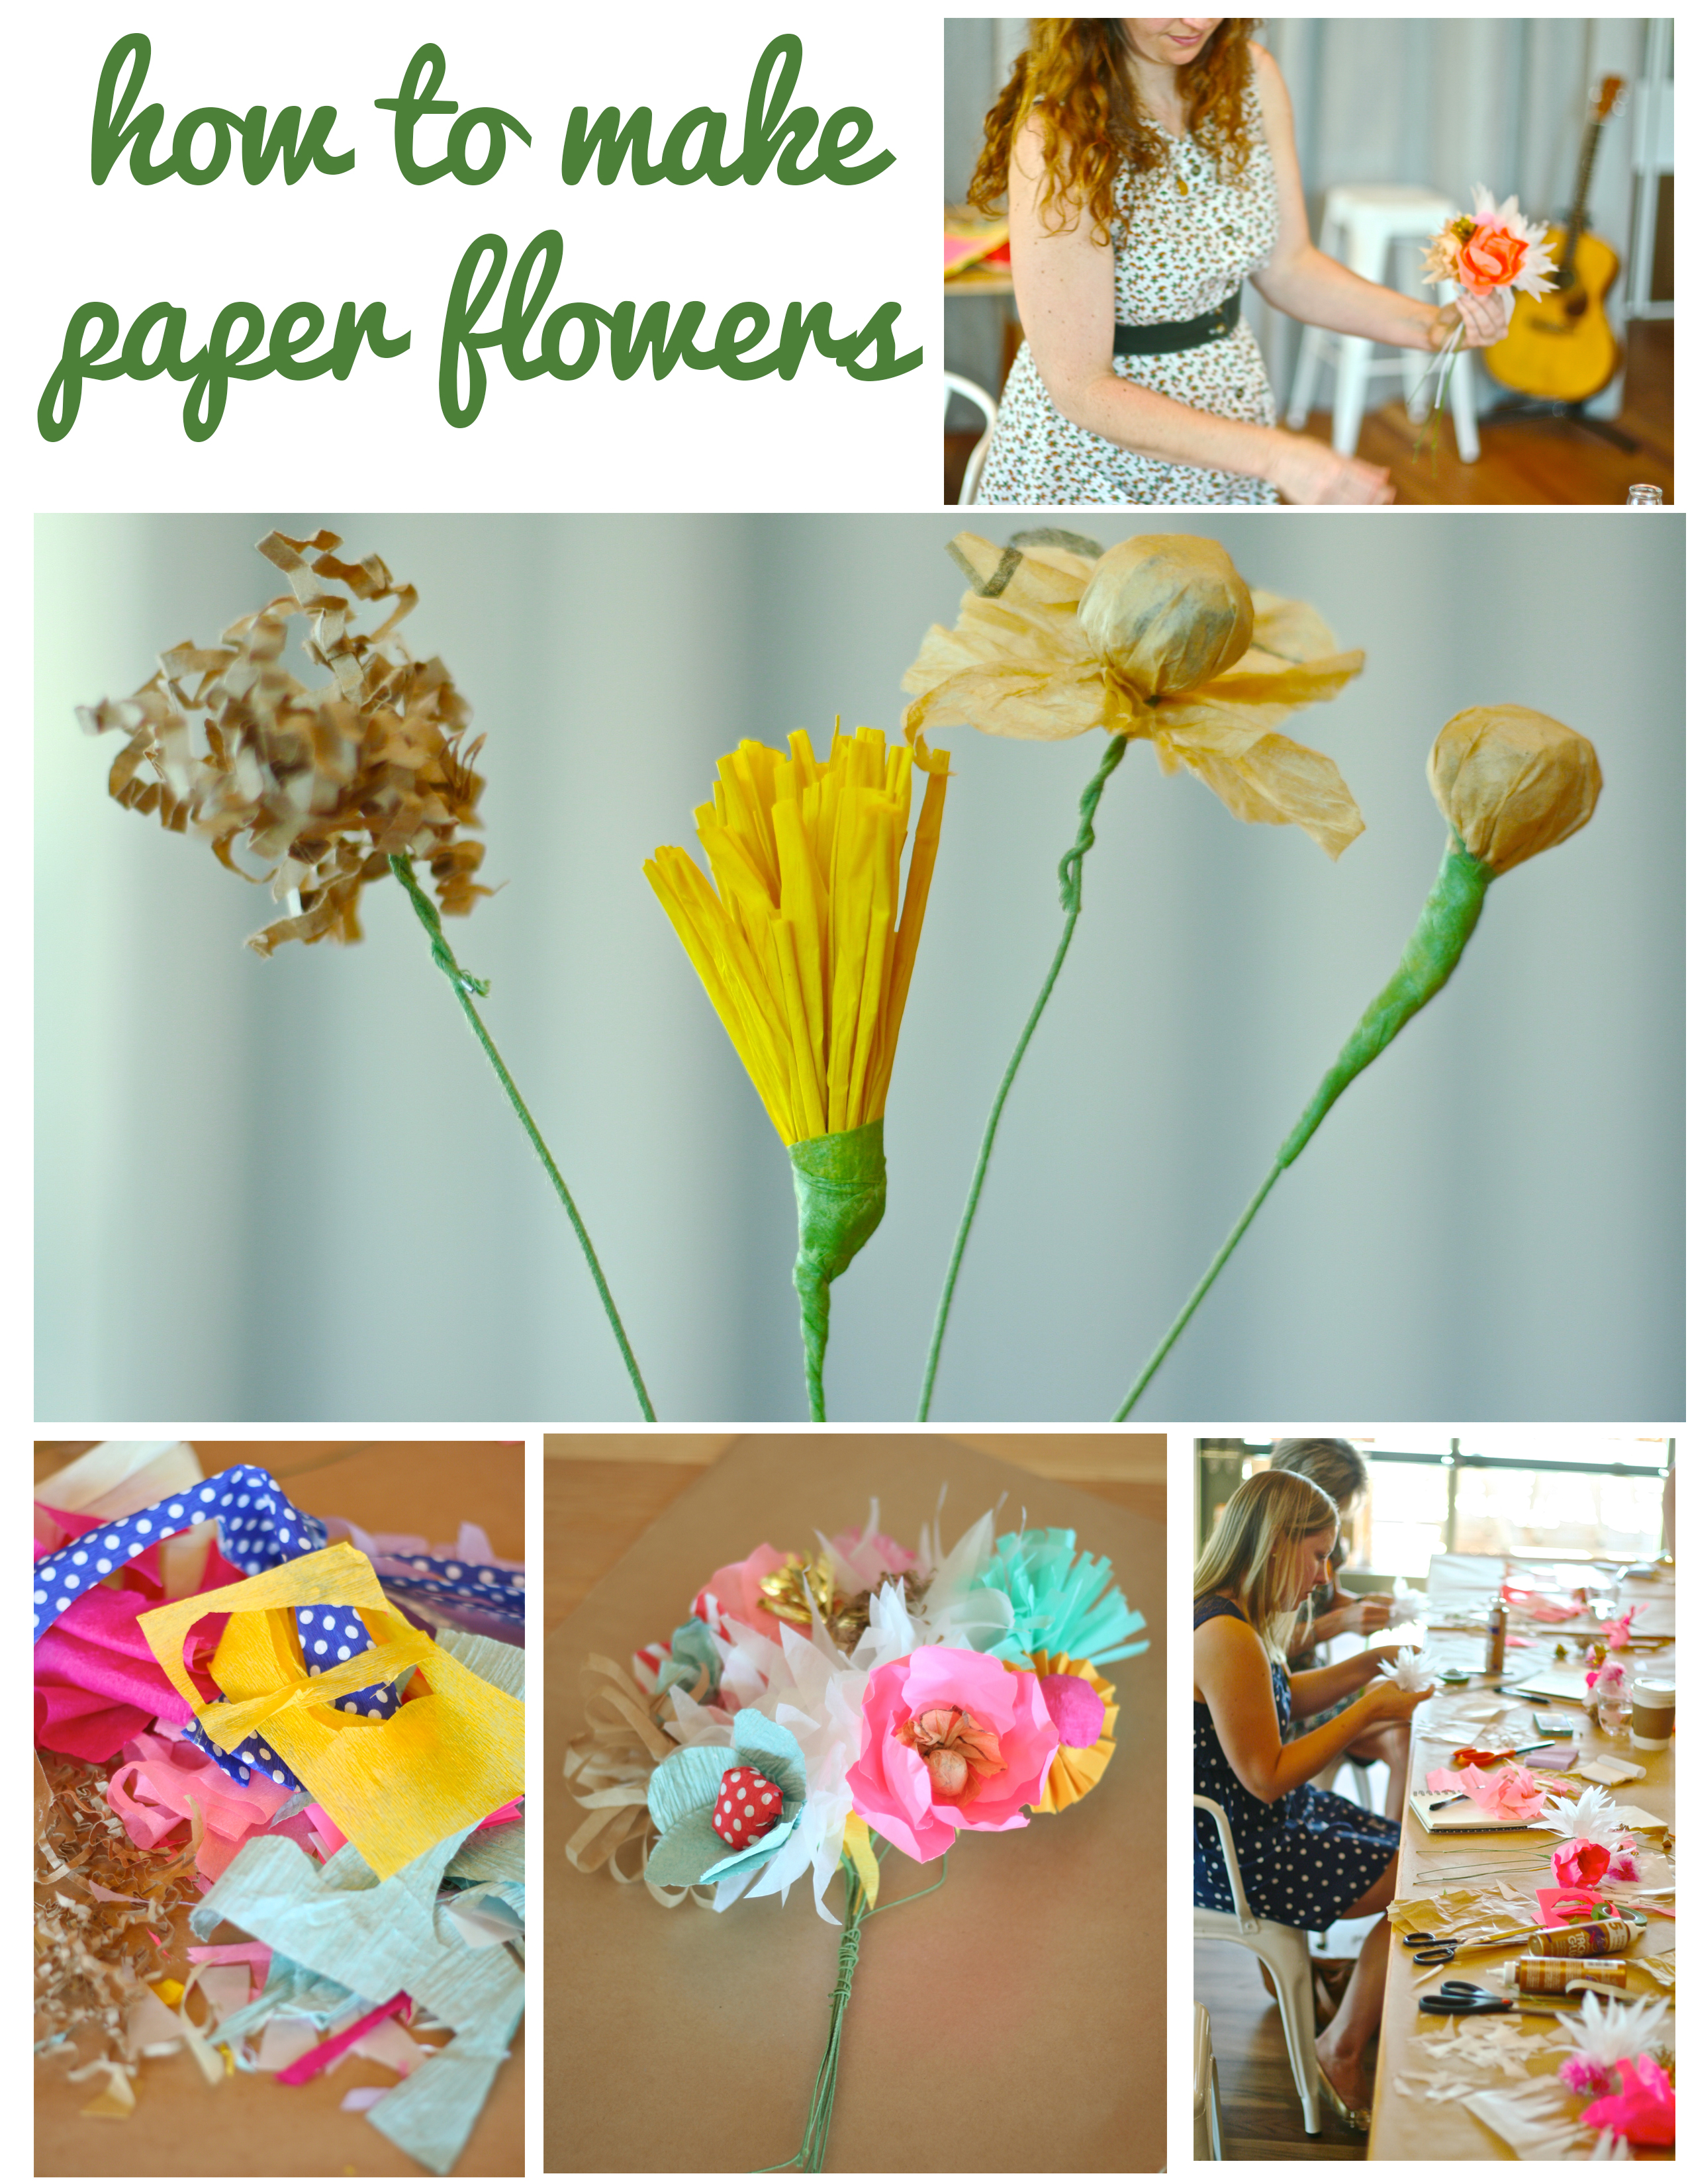 how to make paper flowers with courtney cerruti Dear